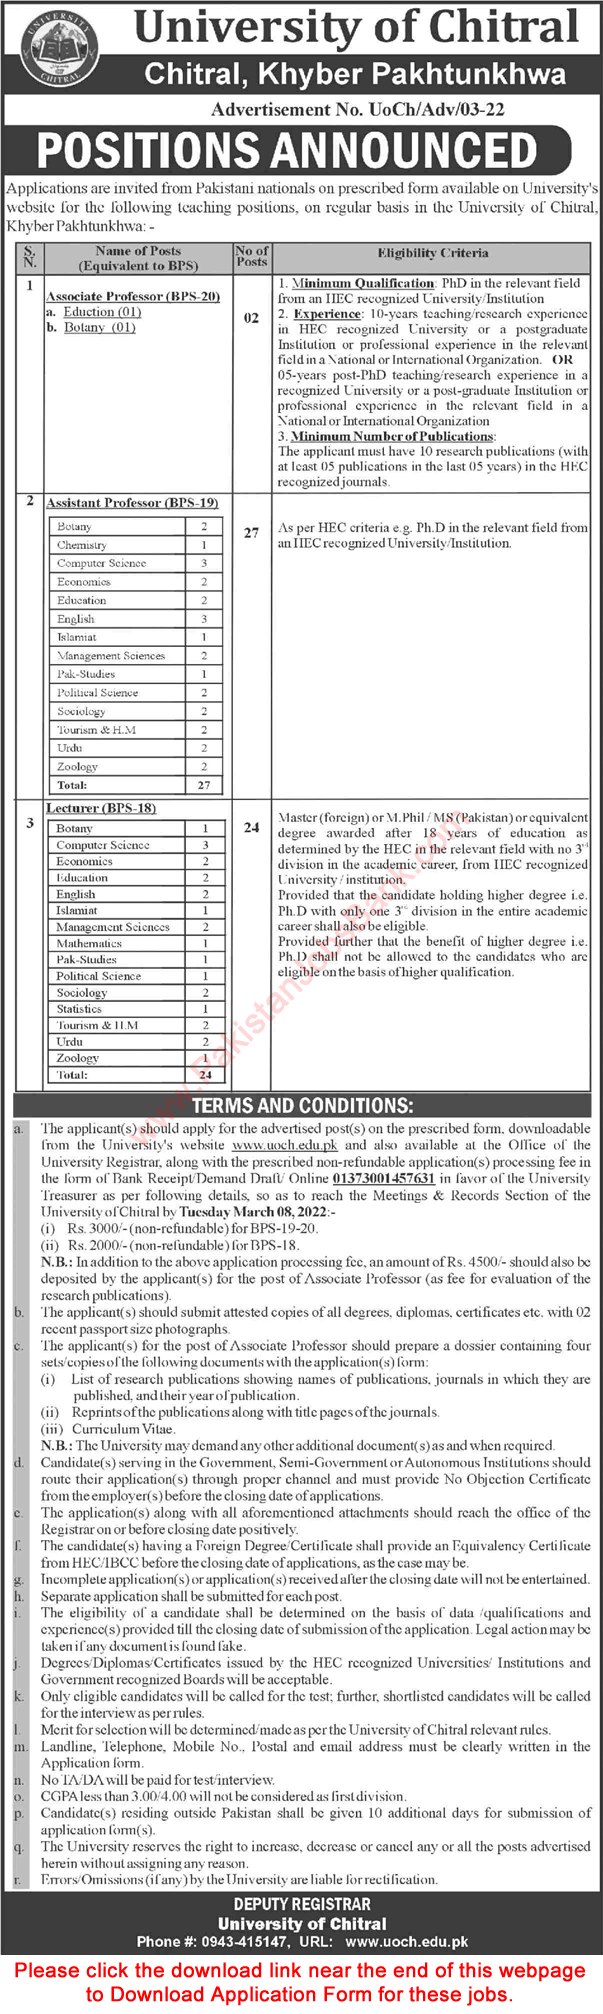 Teaching Faculty Jobs in University of Chitral February 2022 Application Form Latest